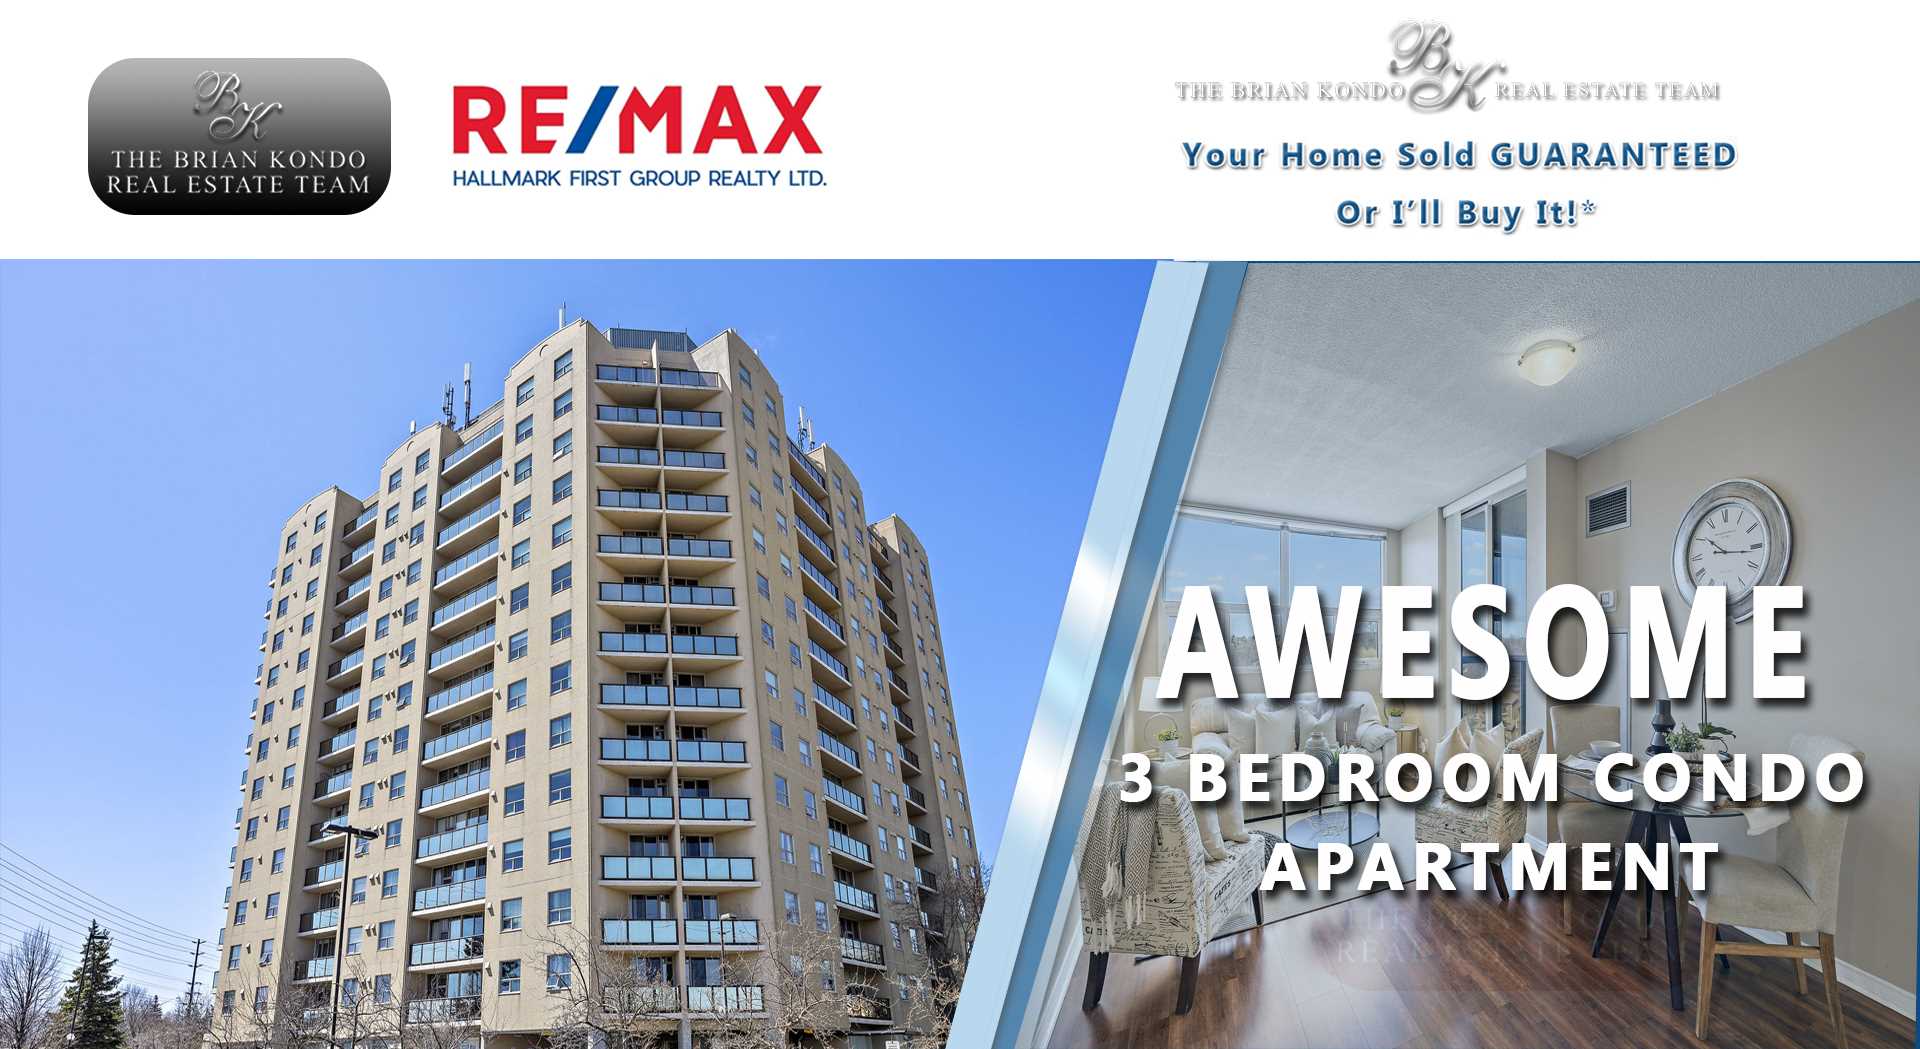 AWESOME 3 BEDROOM CONDO APARTMENT FOR SALE! | The Brian Kondo Real Estate Team